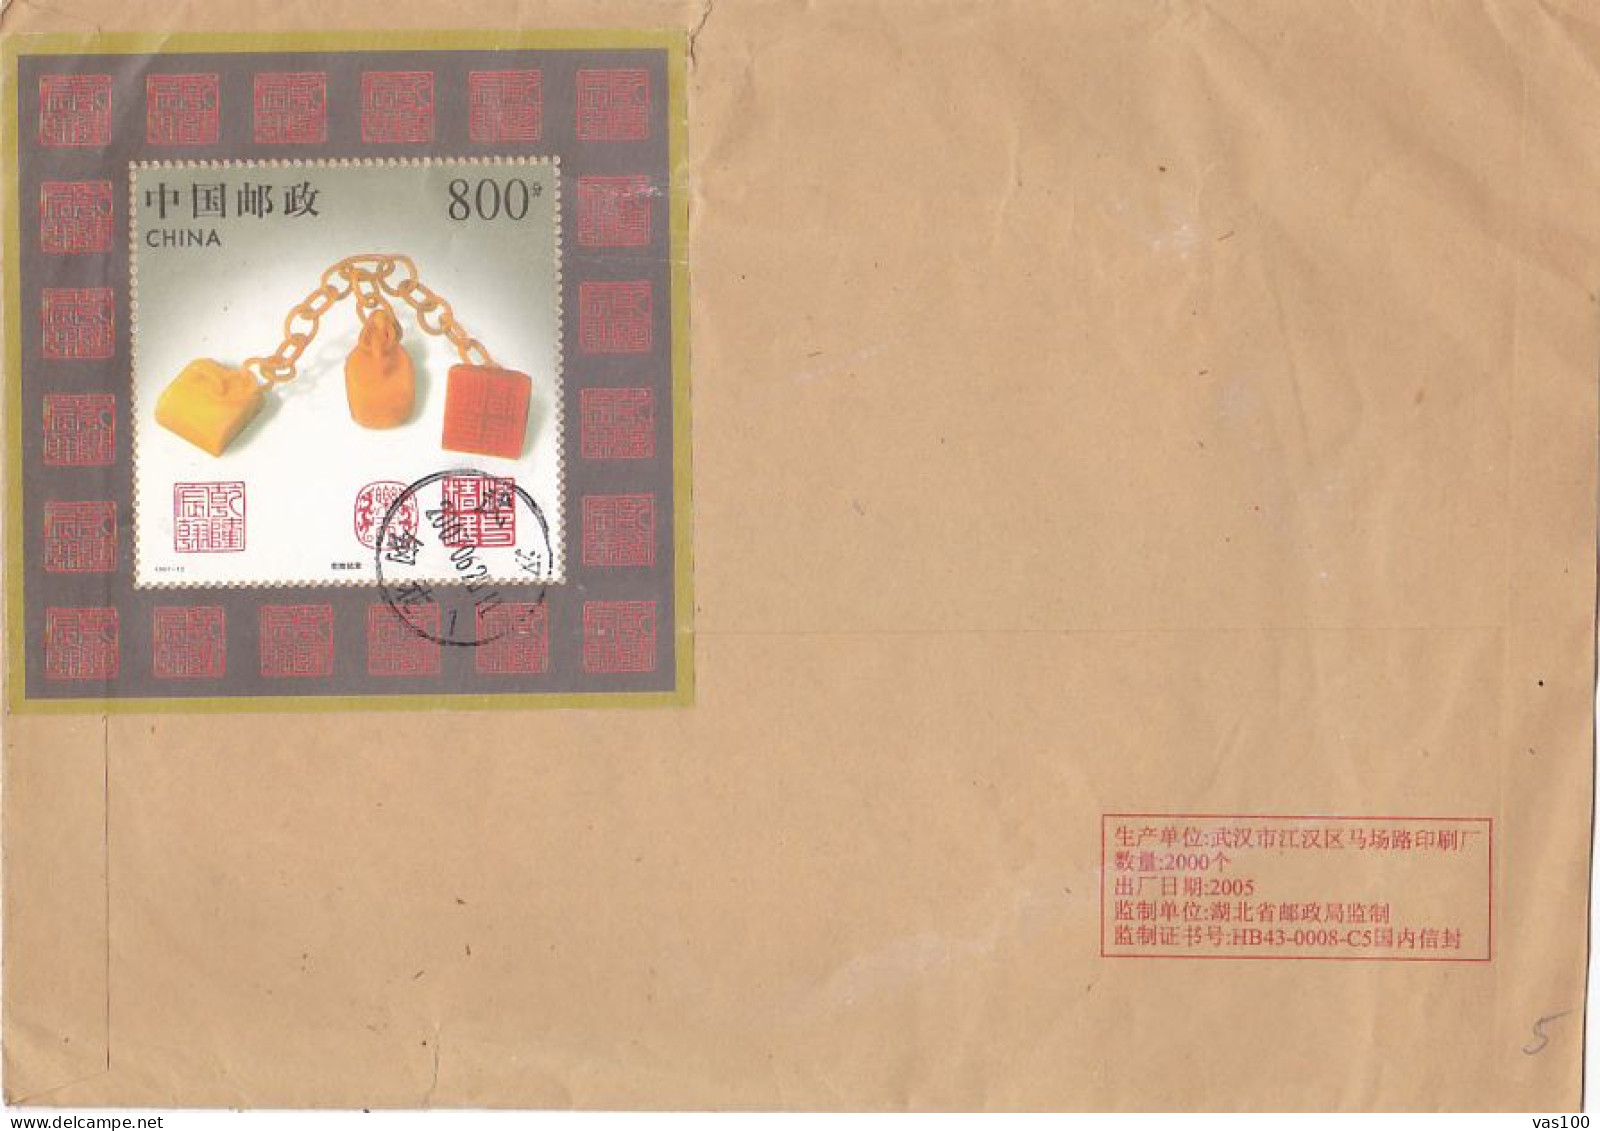 SHOUSHAN STONE CARVINGS, STAMP SHEET ON COVER, 2007, CHINA - Covers & Documents